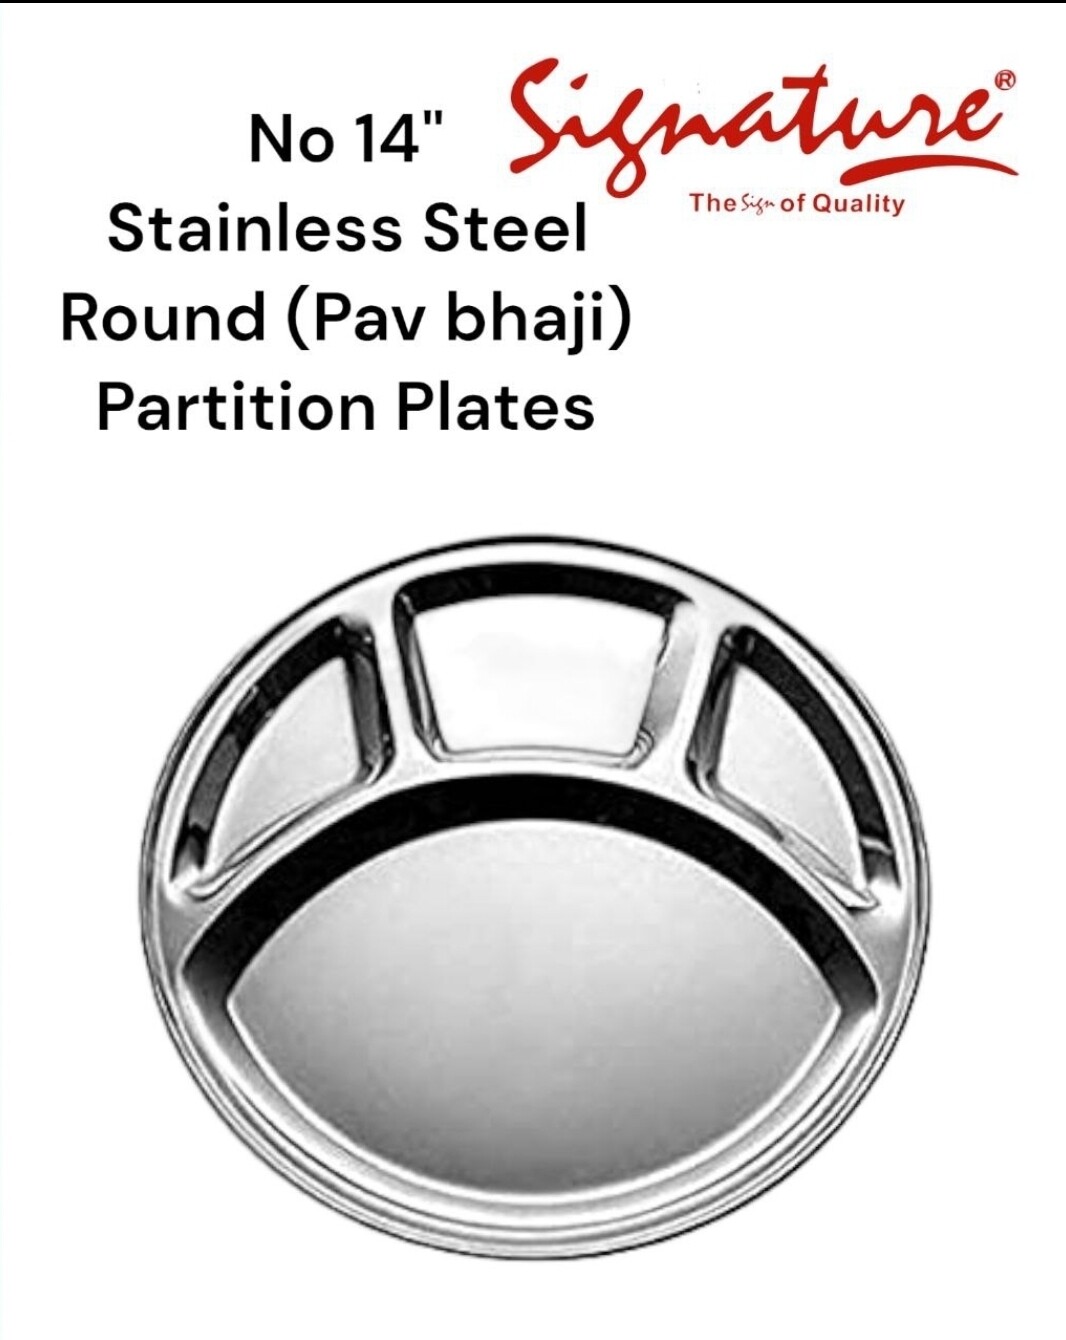 Signature stainless steel partition plate 14Inch